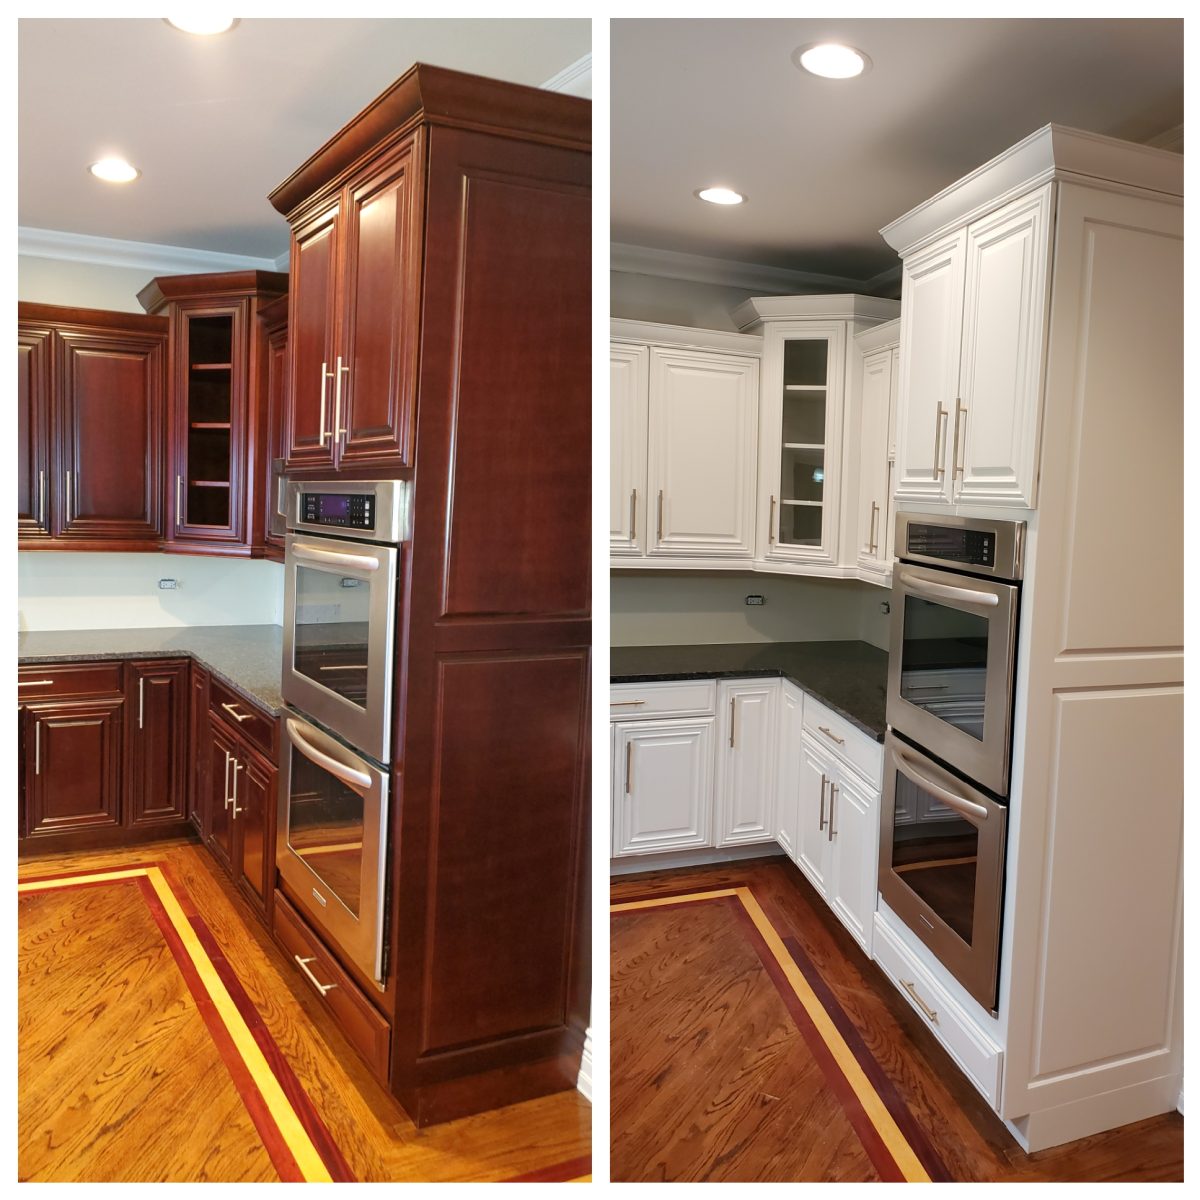 Tips For Painting Cherry Cabinets White, How To Paint Existing Cabinets White